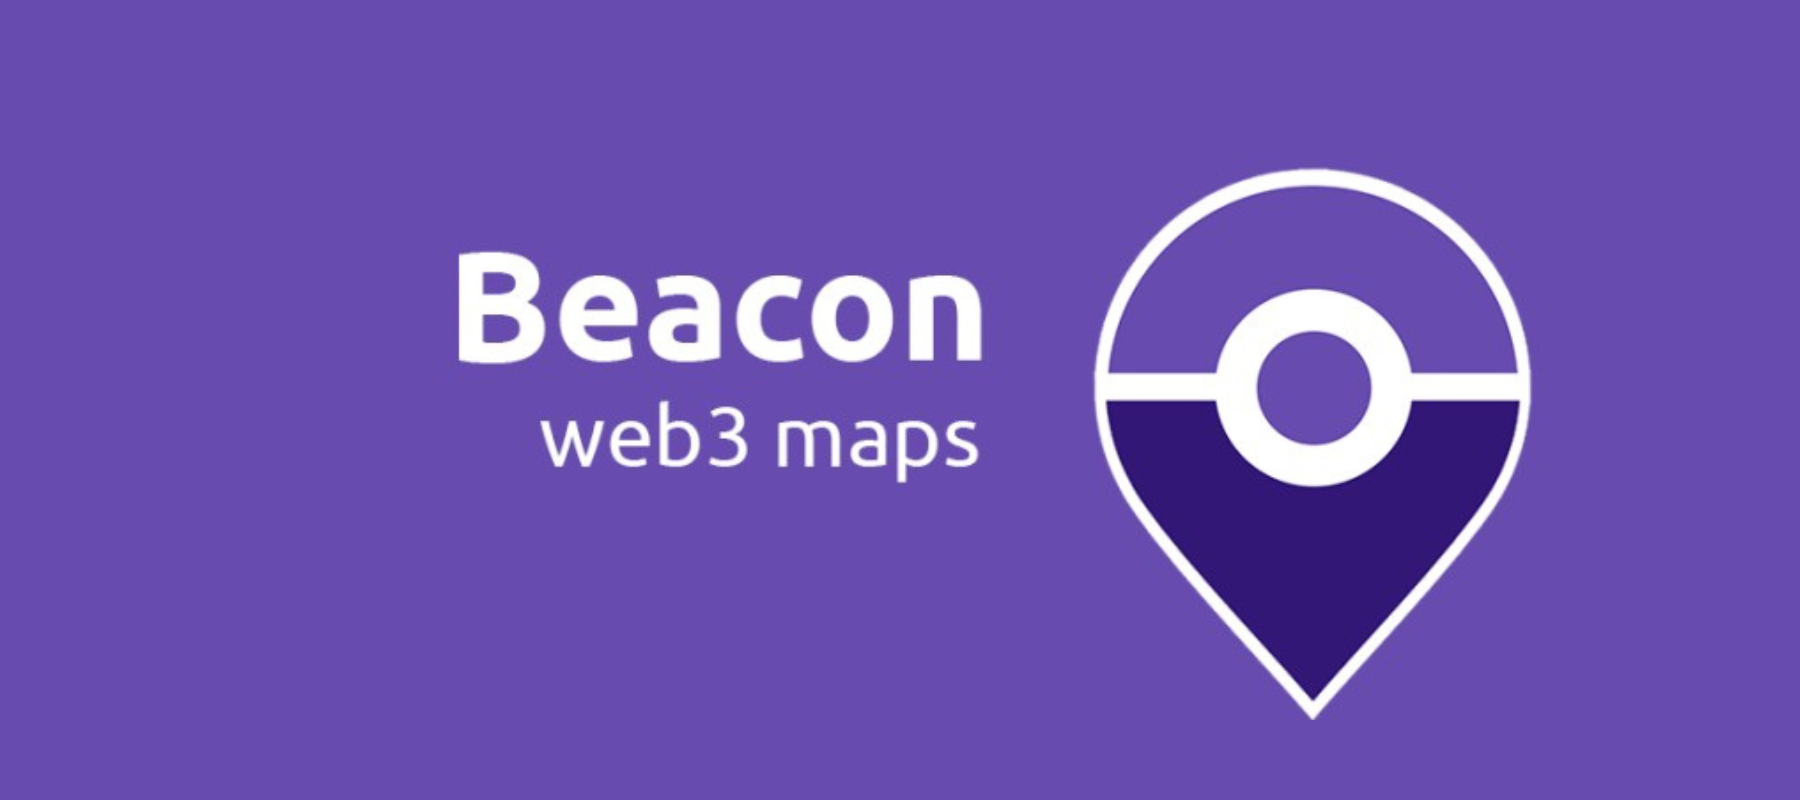 Location-aware startup Beacon looks to disrupt local search with AI-driven local answers